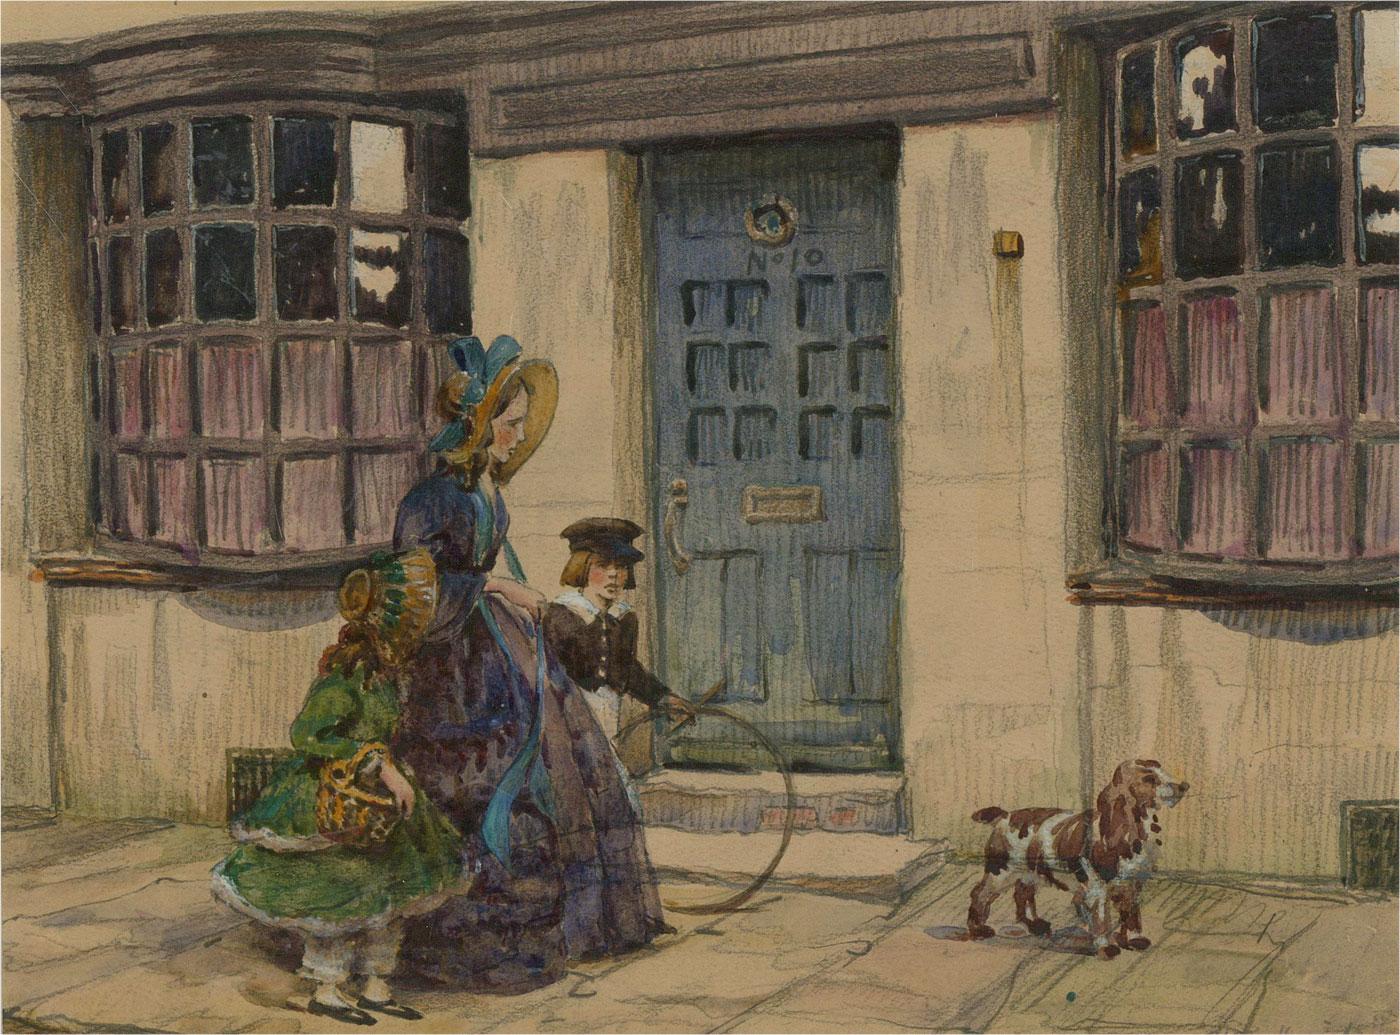 An accomplished watercolour painting with gouache and graphite details by the artist H.W.G. Betteridge, depicting a street scene with three figures and a dog. Signed to the lower right-hand corner. Well-presented in a white card mount and in a